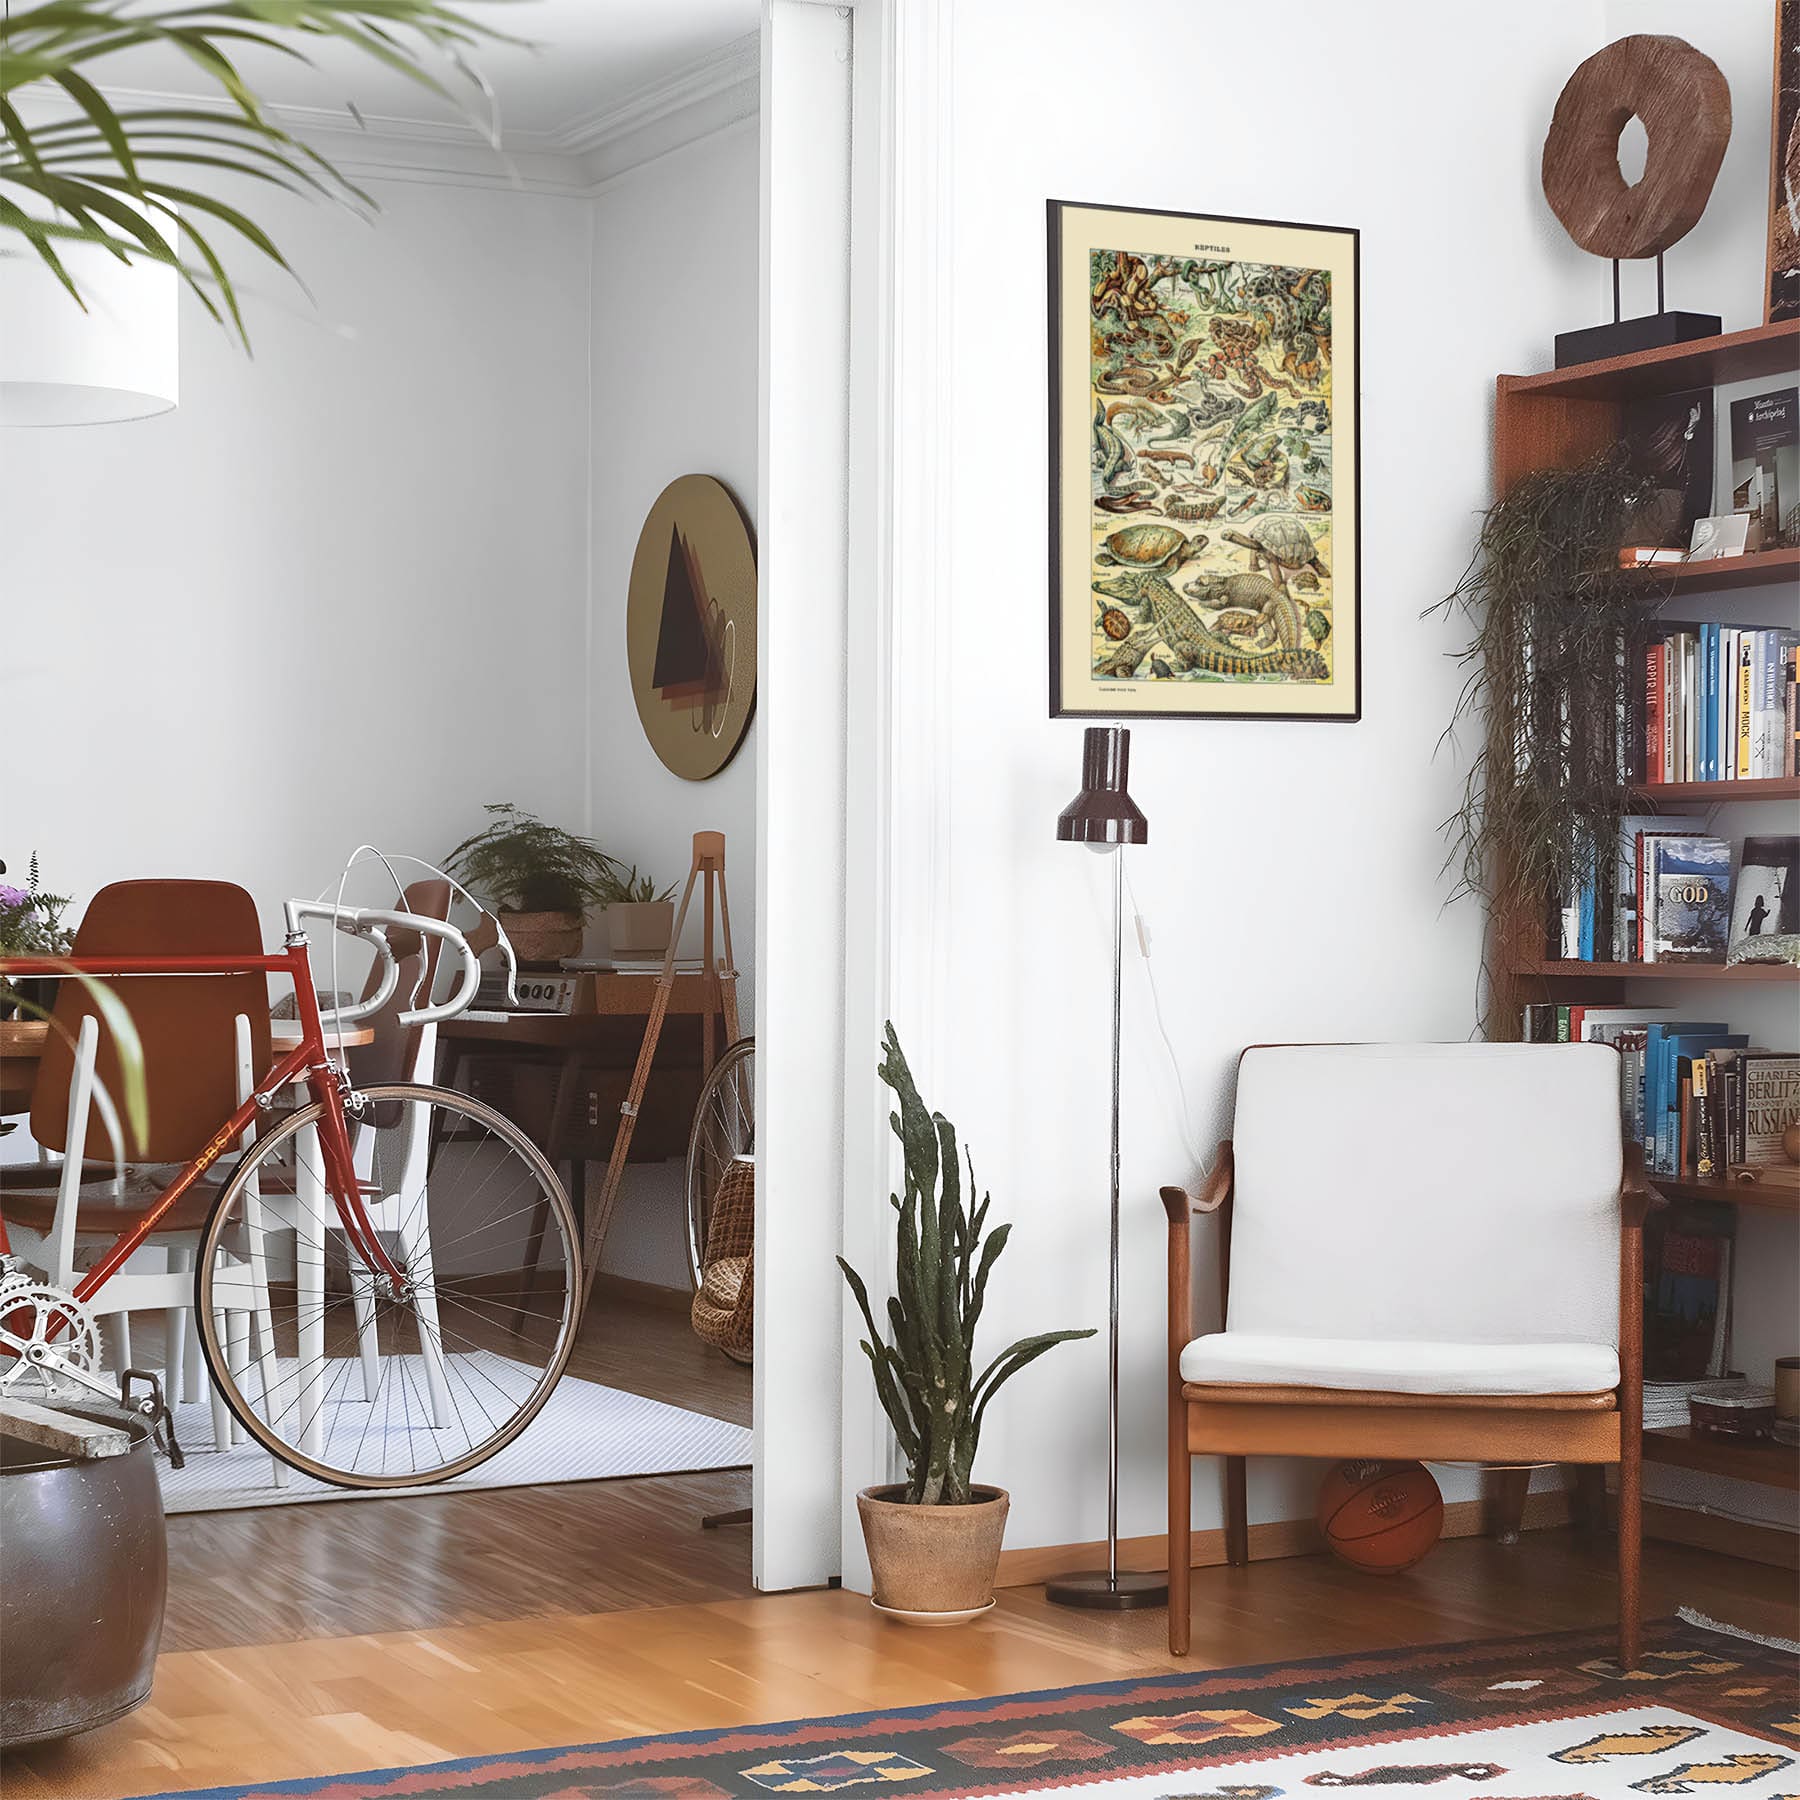 Eclectic living room with a road bike, bookshelf and house plants that features framed artwork of a Wild Reptiles above a chair and lamp